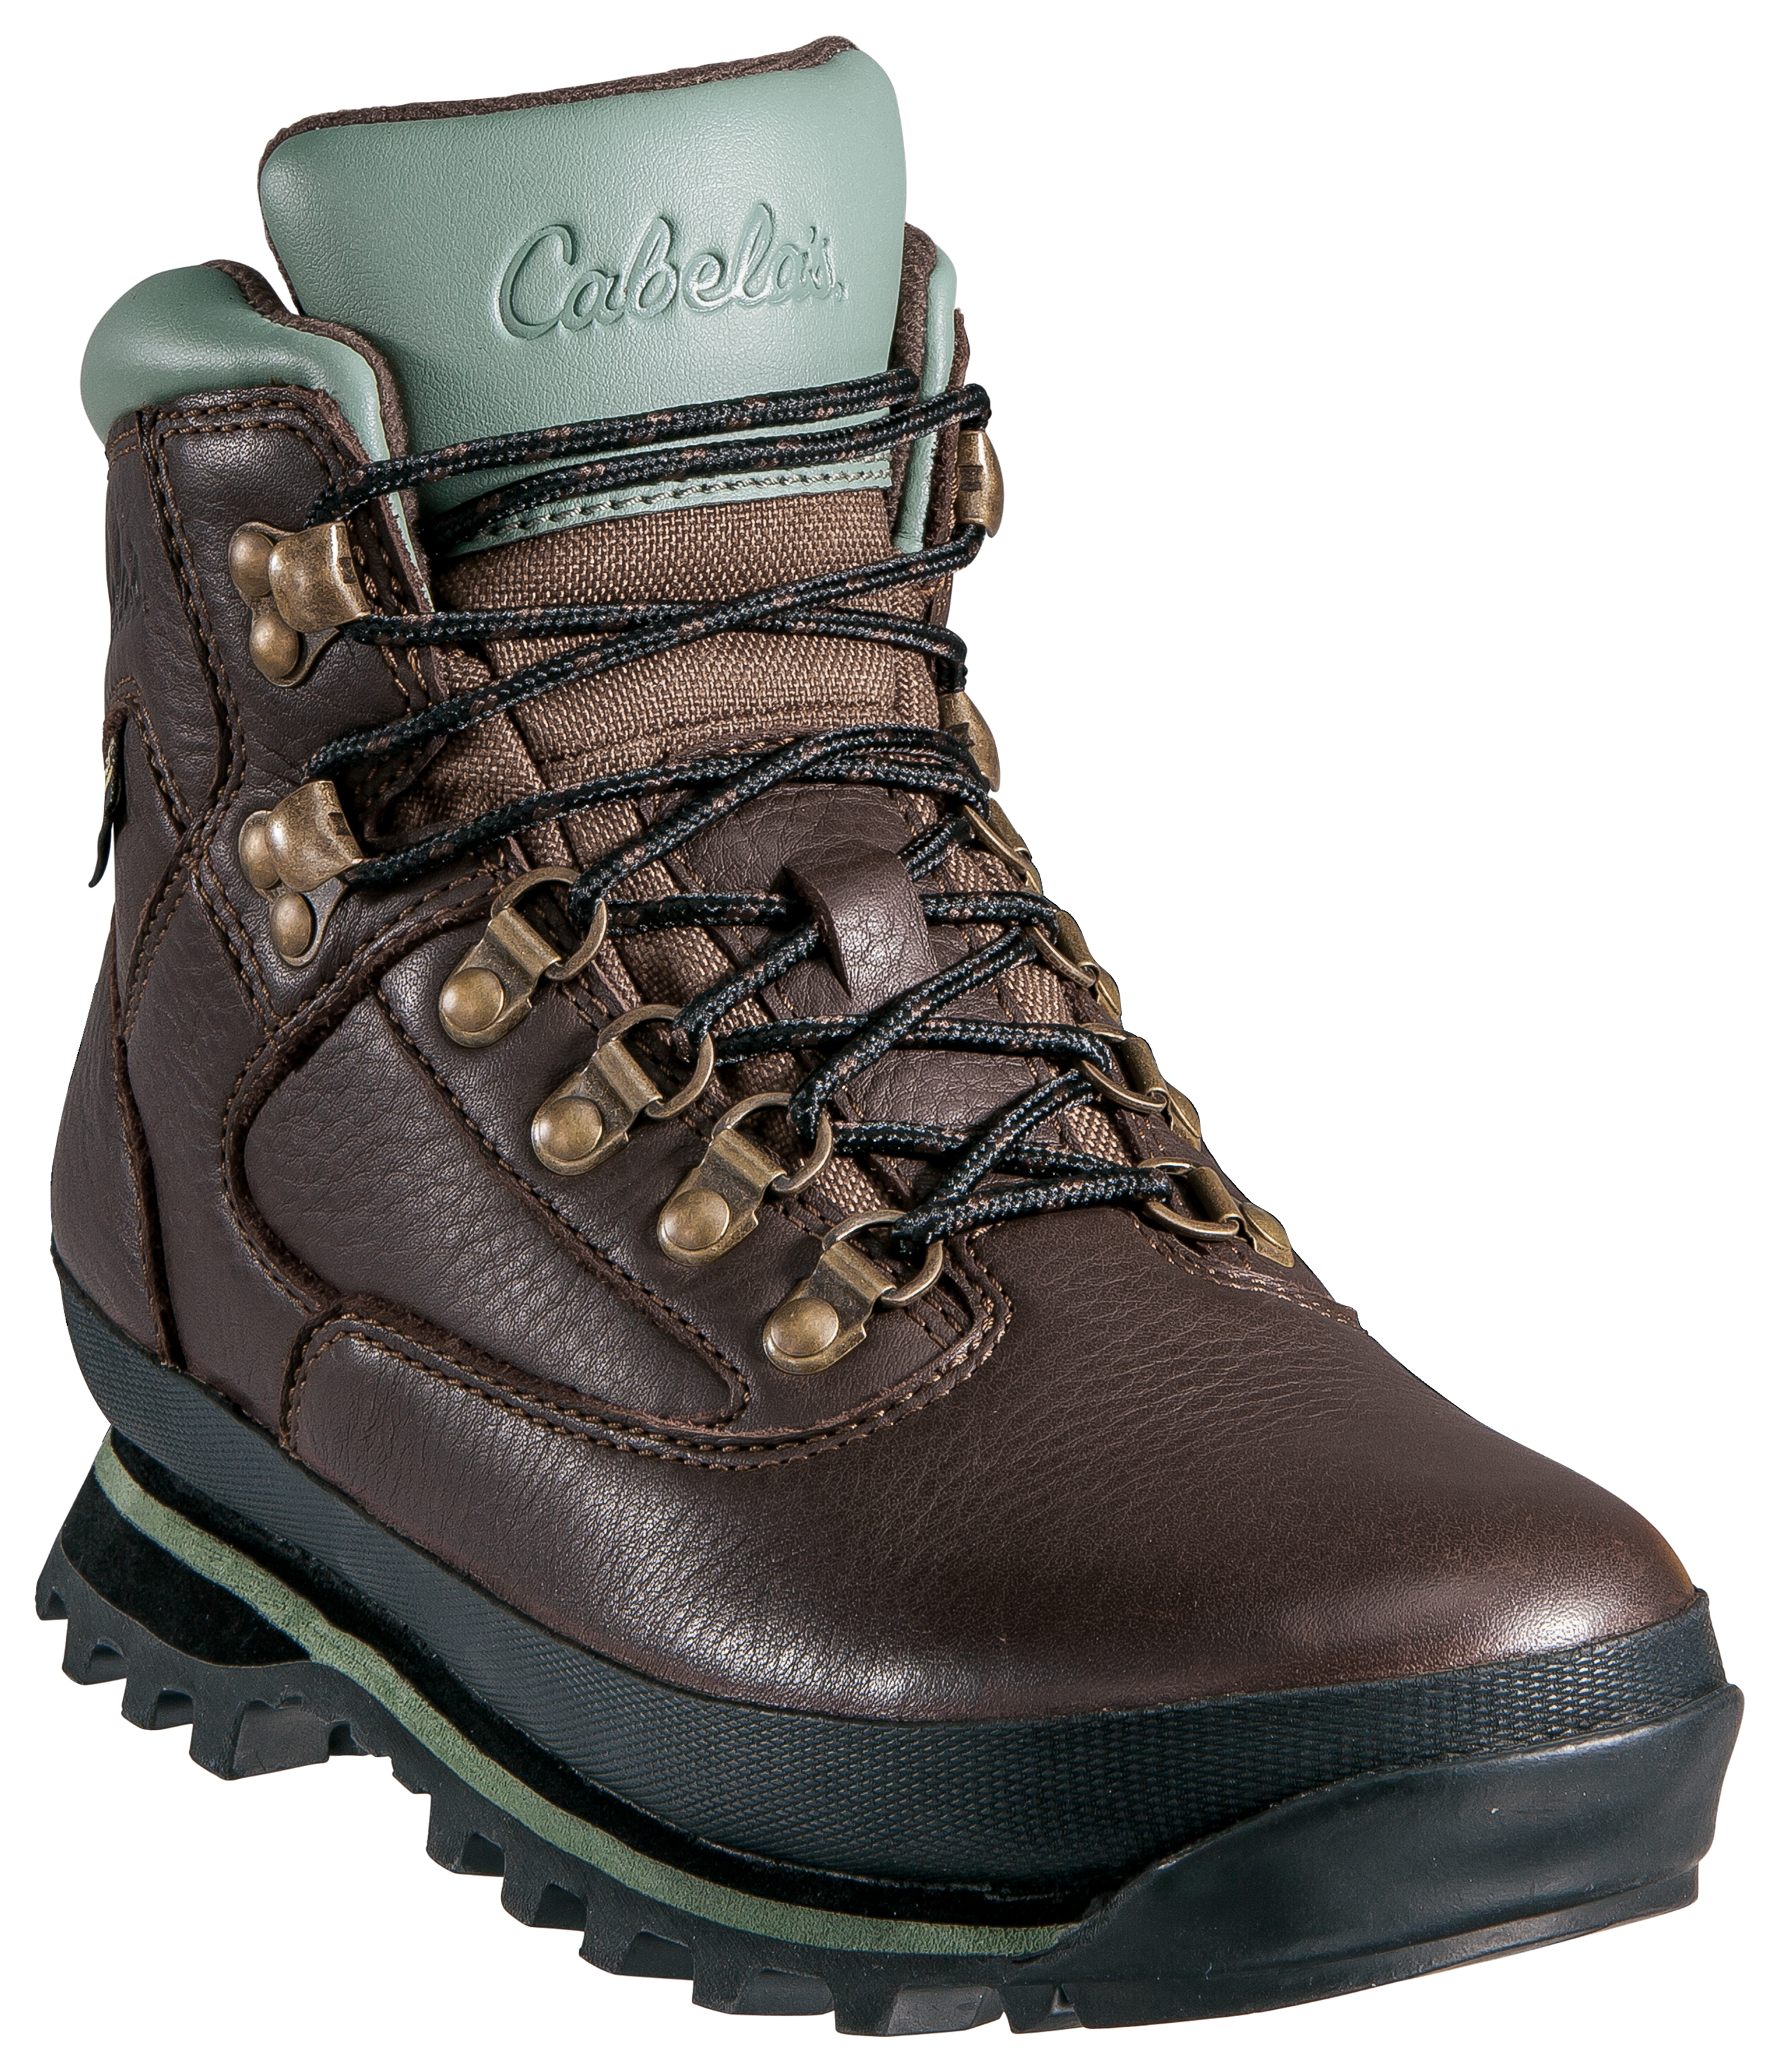 Cabela's Rimrock Mid GORE-TEX Hiking Boots for Ladies - Brown - 7 M